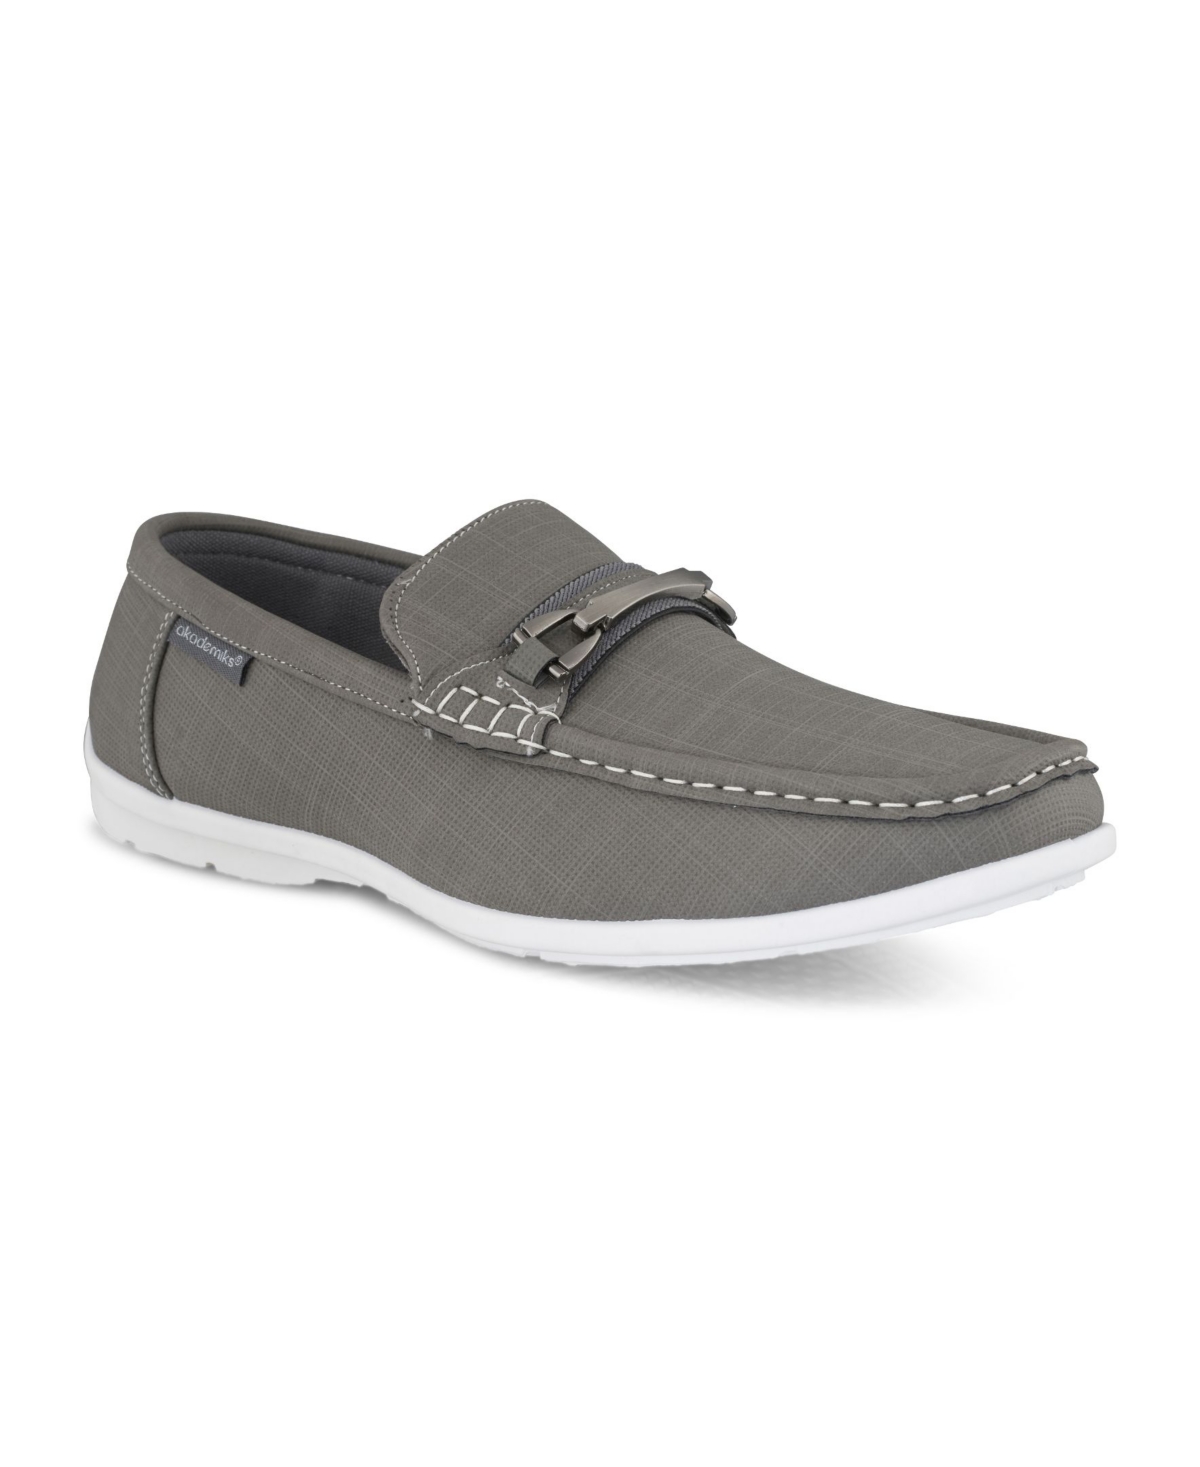 Akademiks Men's Moccasin Loafers Men's Shoes In Grey